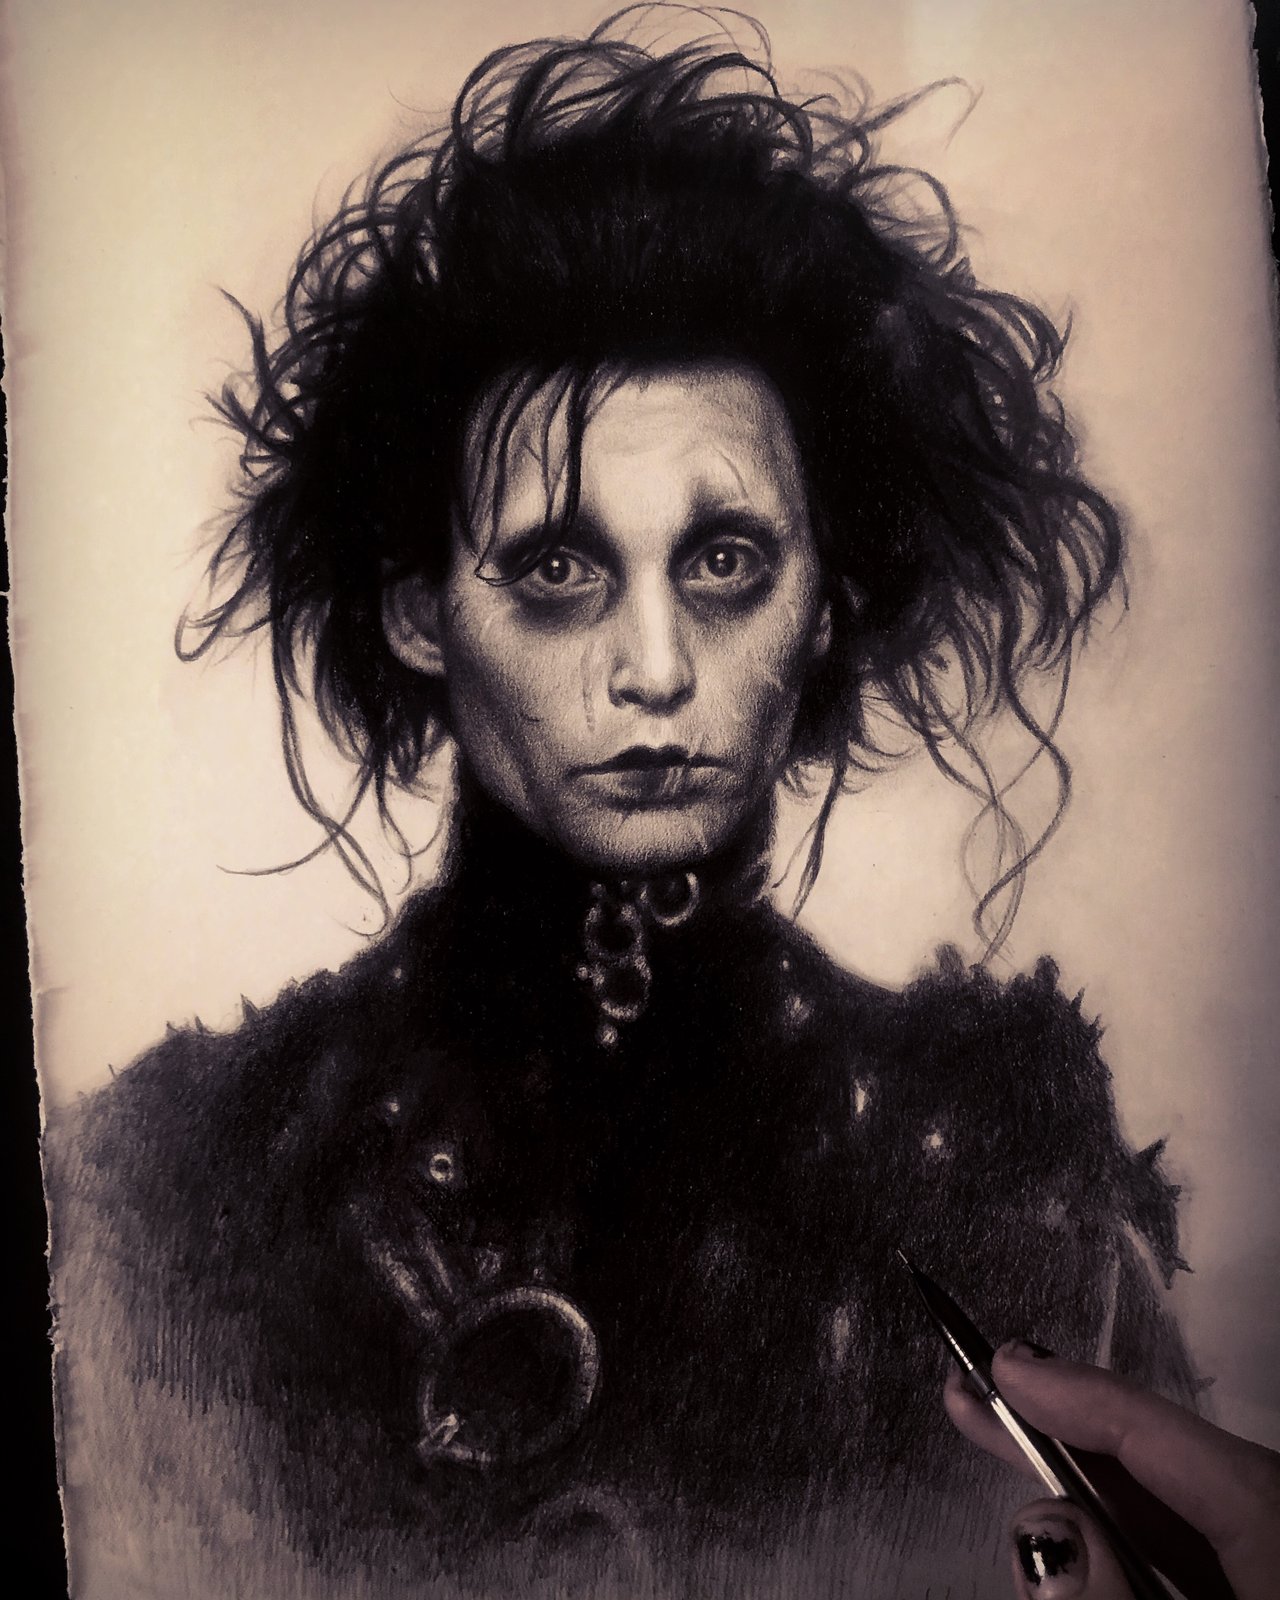 A drawing of Edward scissorhands. — Hive